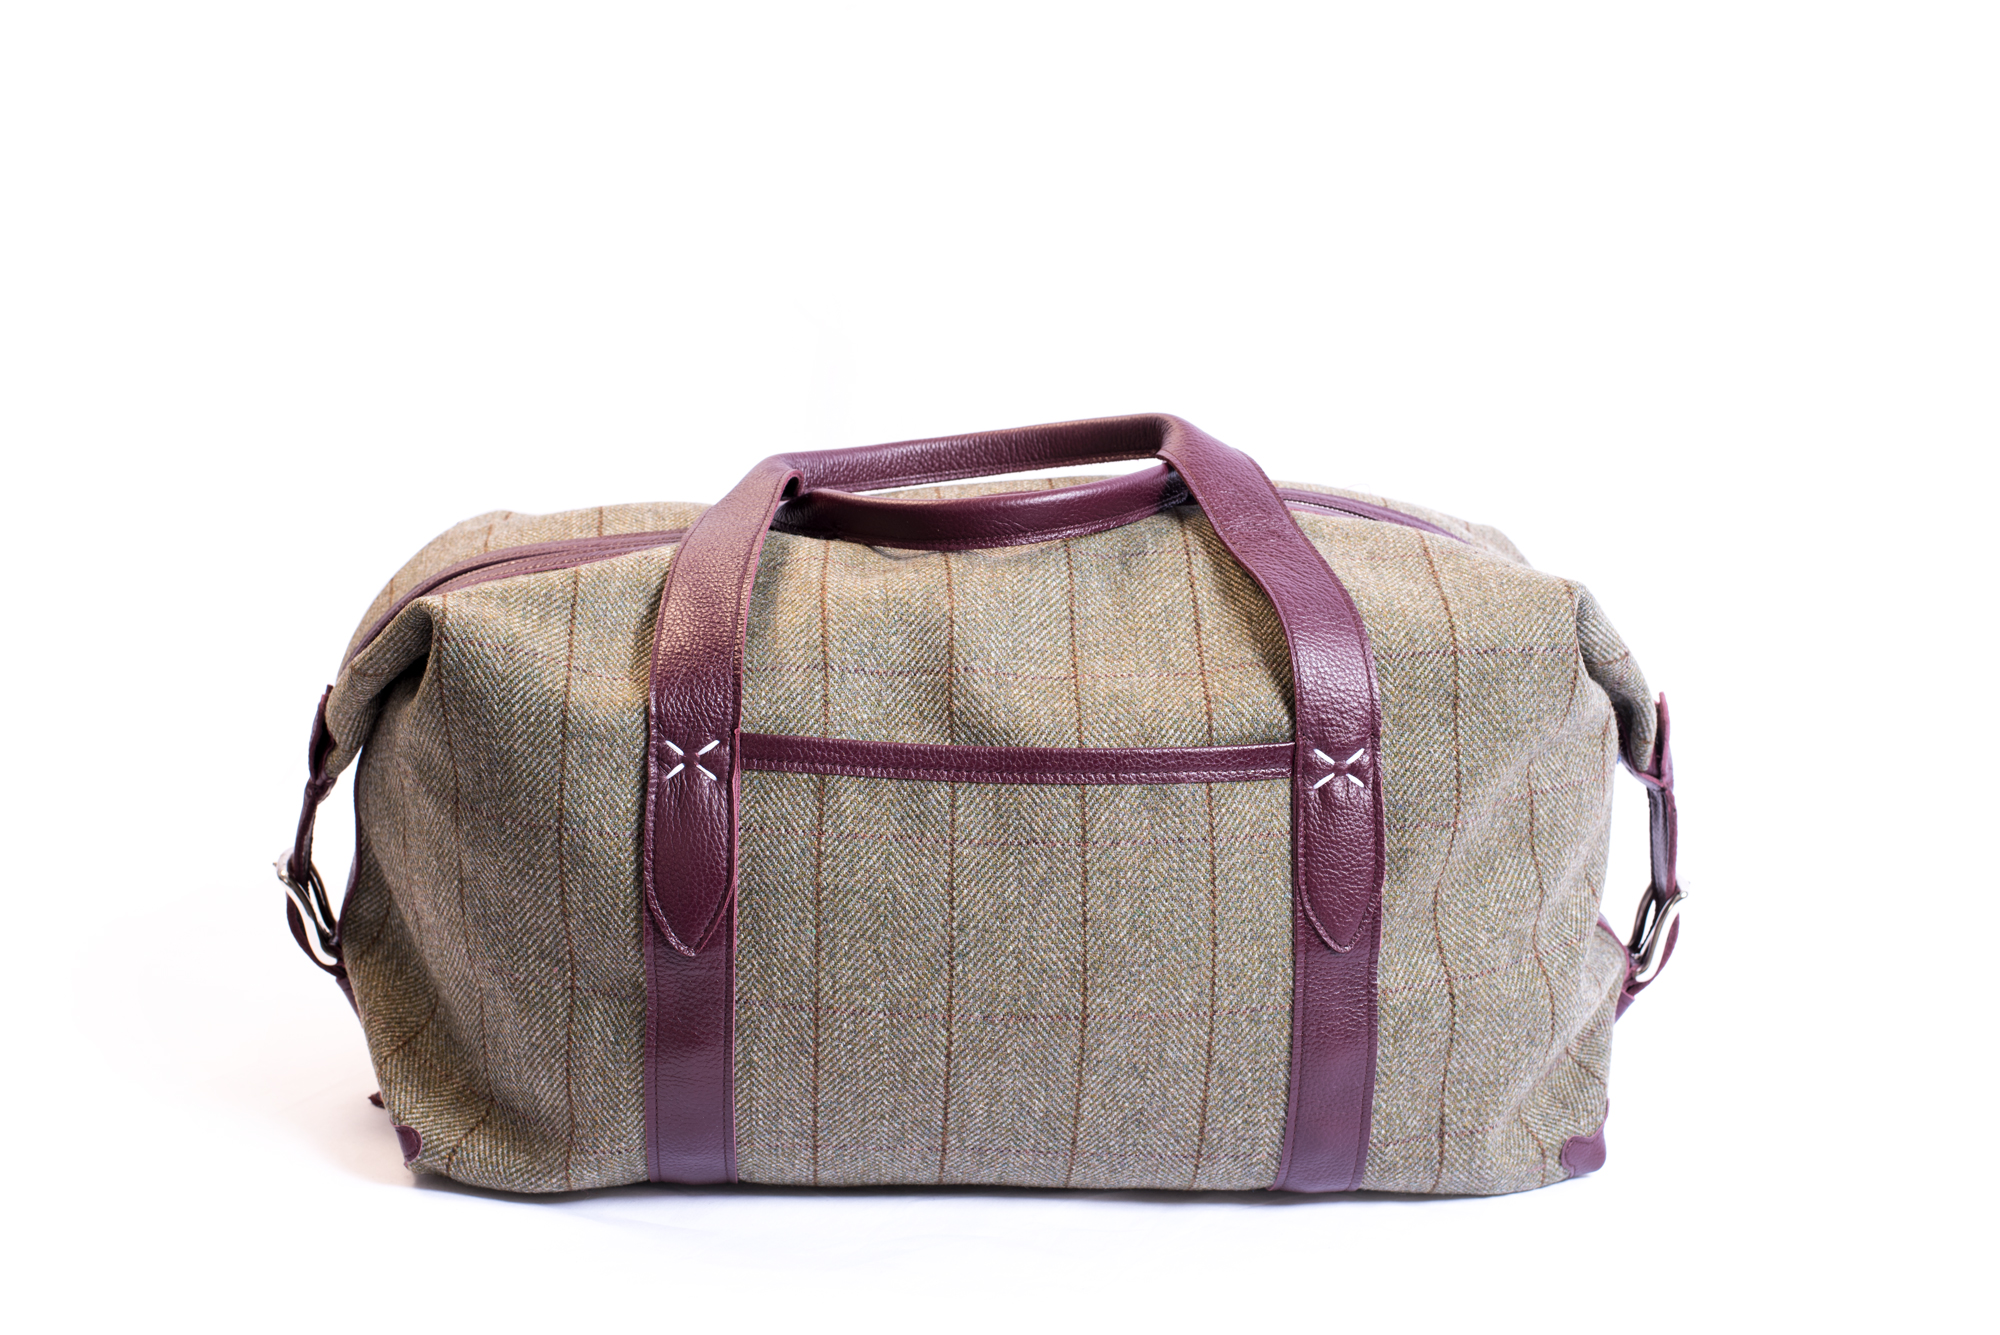 http://www.osomo.ch/projects/bags/campbell02/campbell02_4.jpg